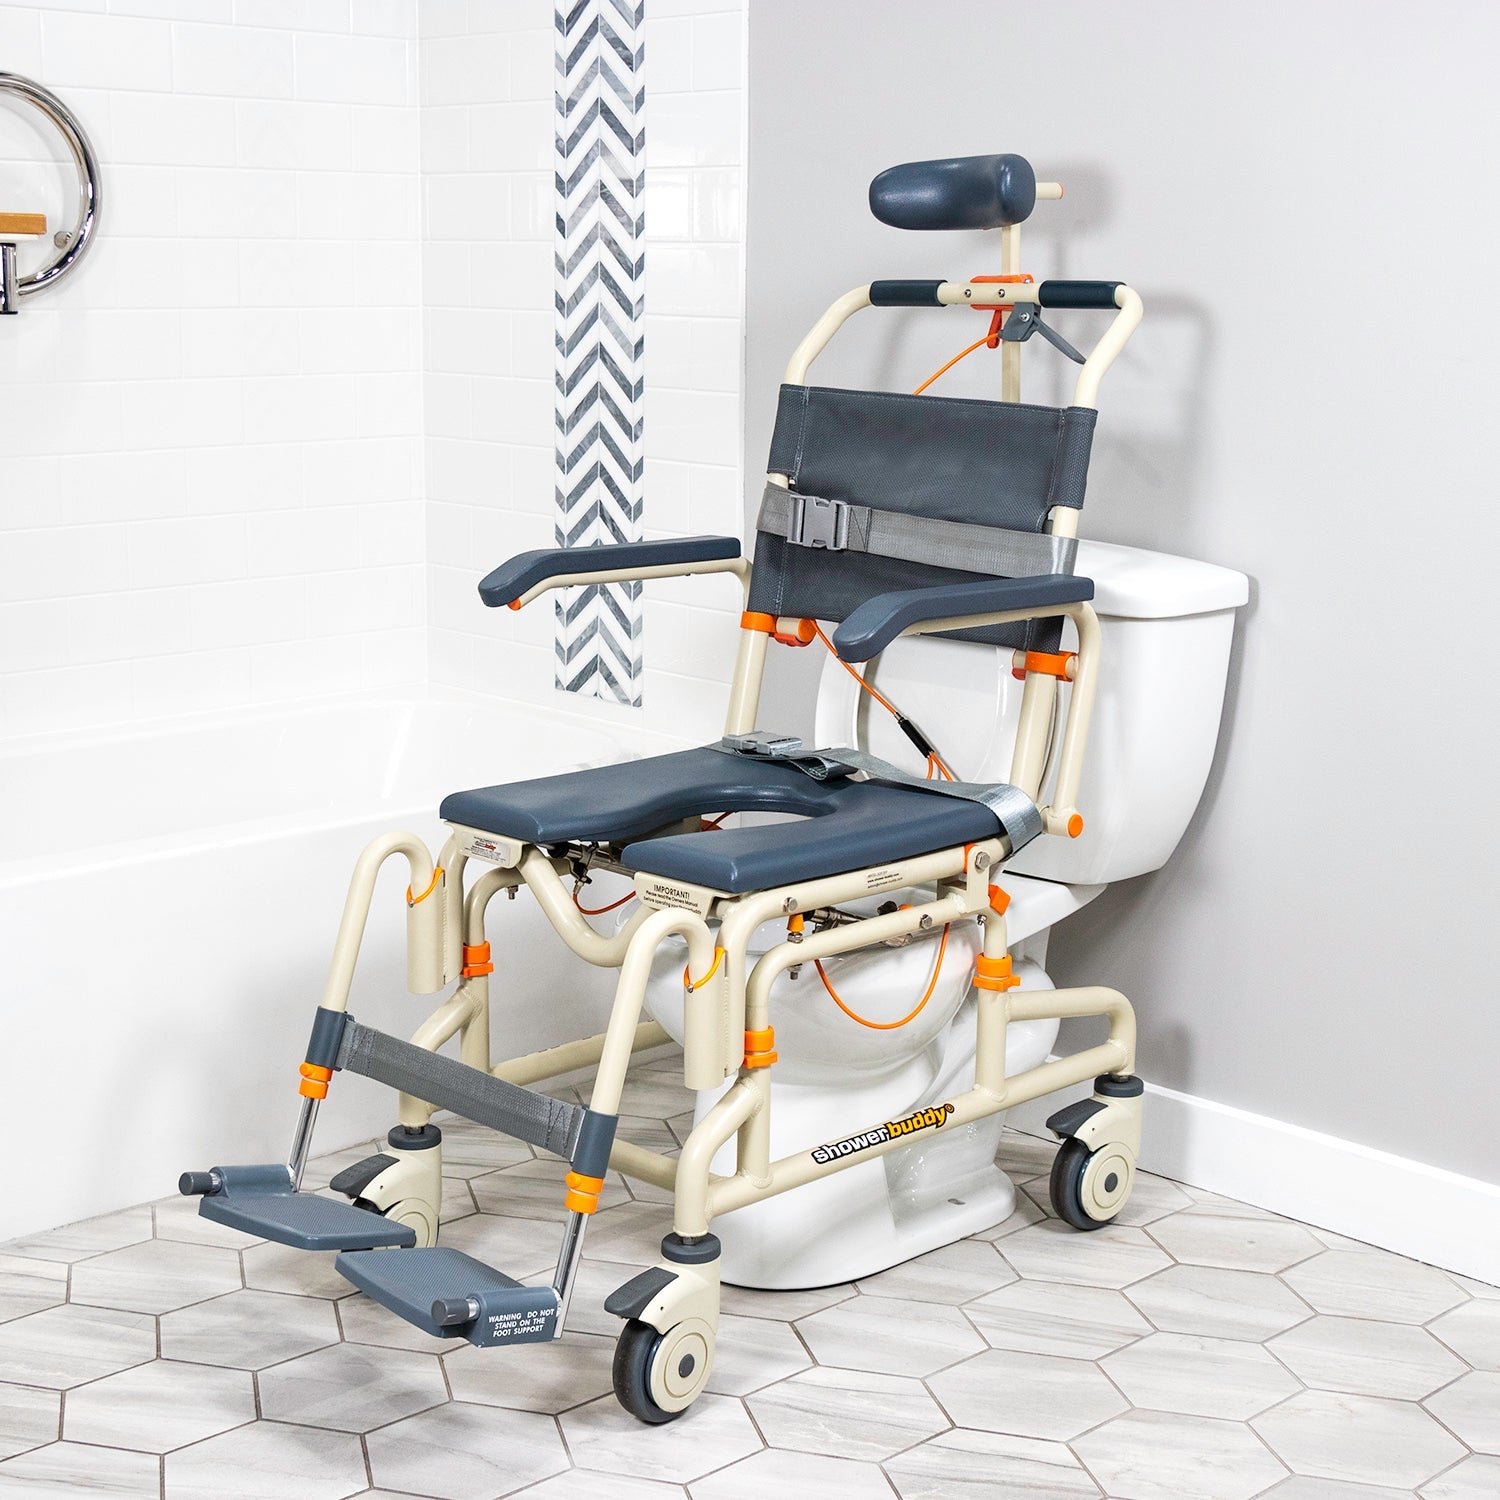 ShowerBuddy SB3T Roll-In Shower Chair with Tilt-SolutionBased